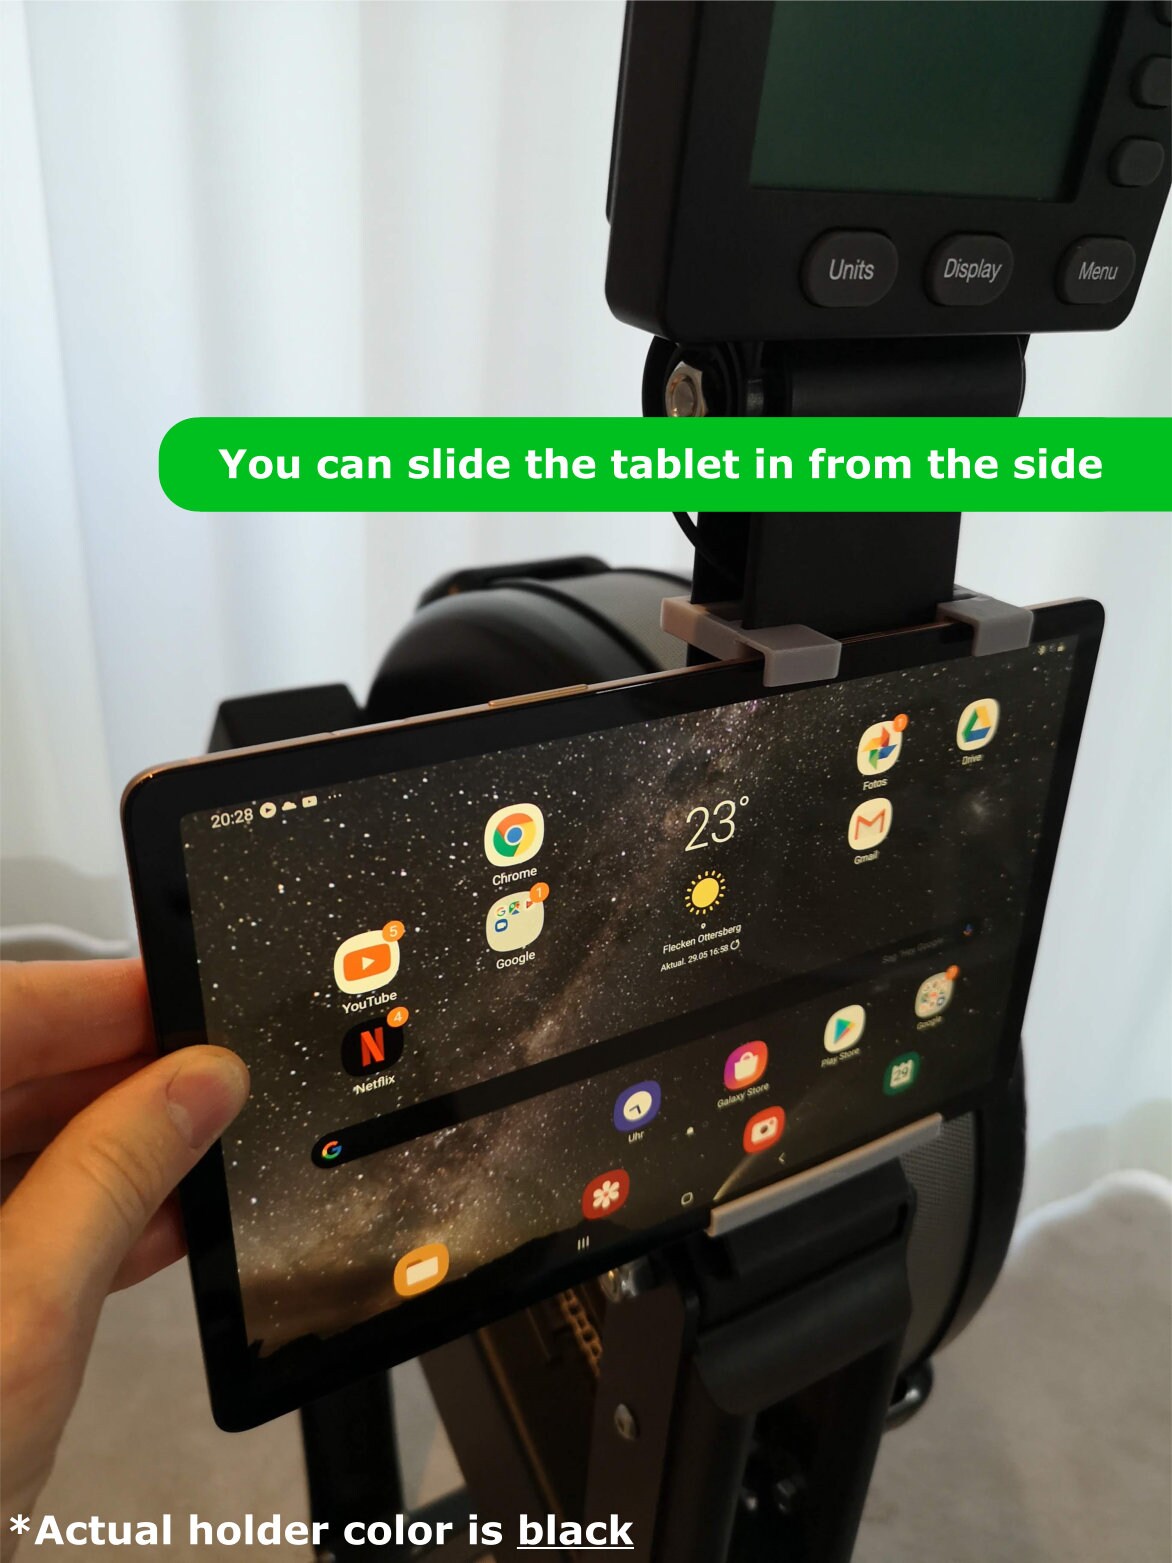 phone and tablet ipad holder up to 11in screen size Details about   Concept2 Model C & D